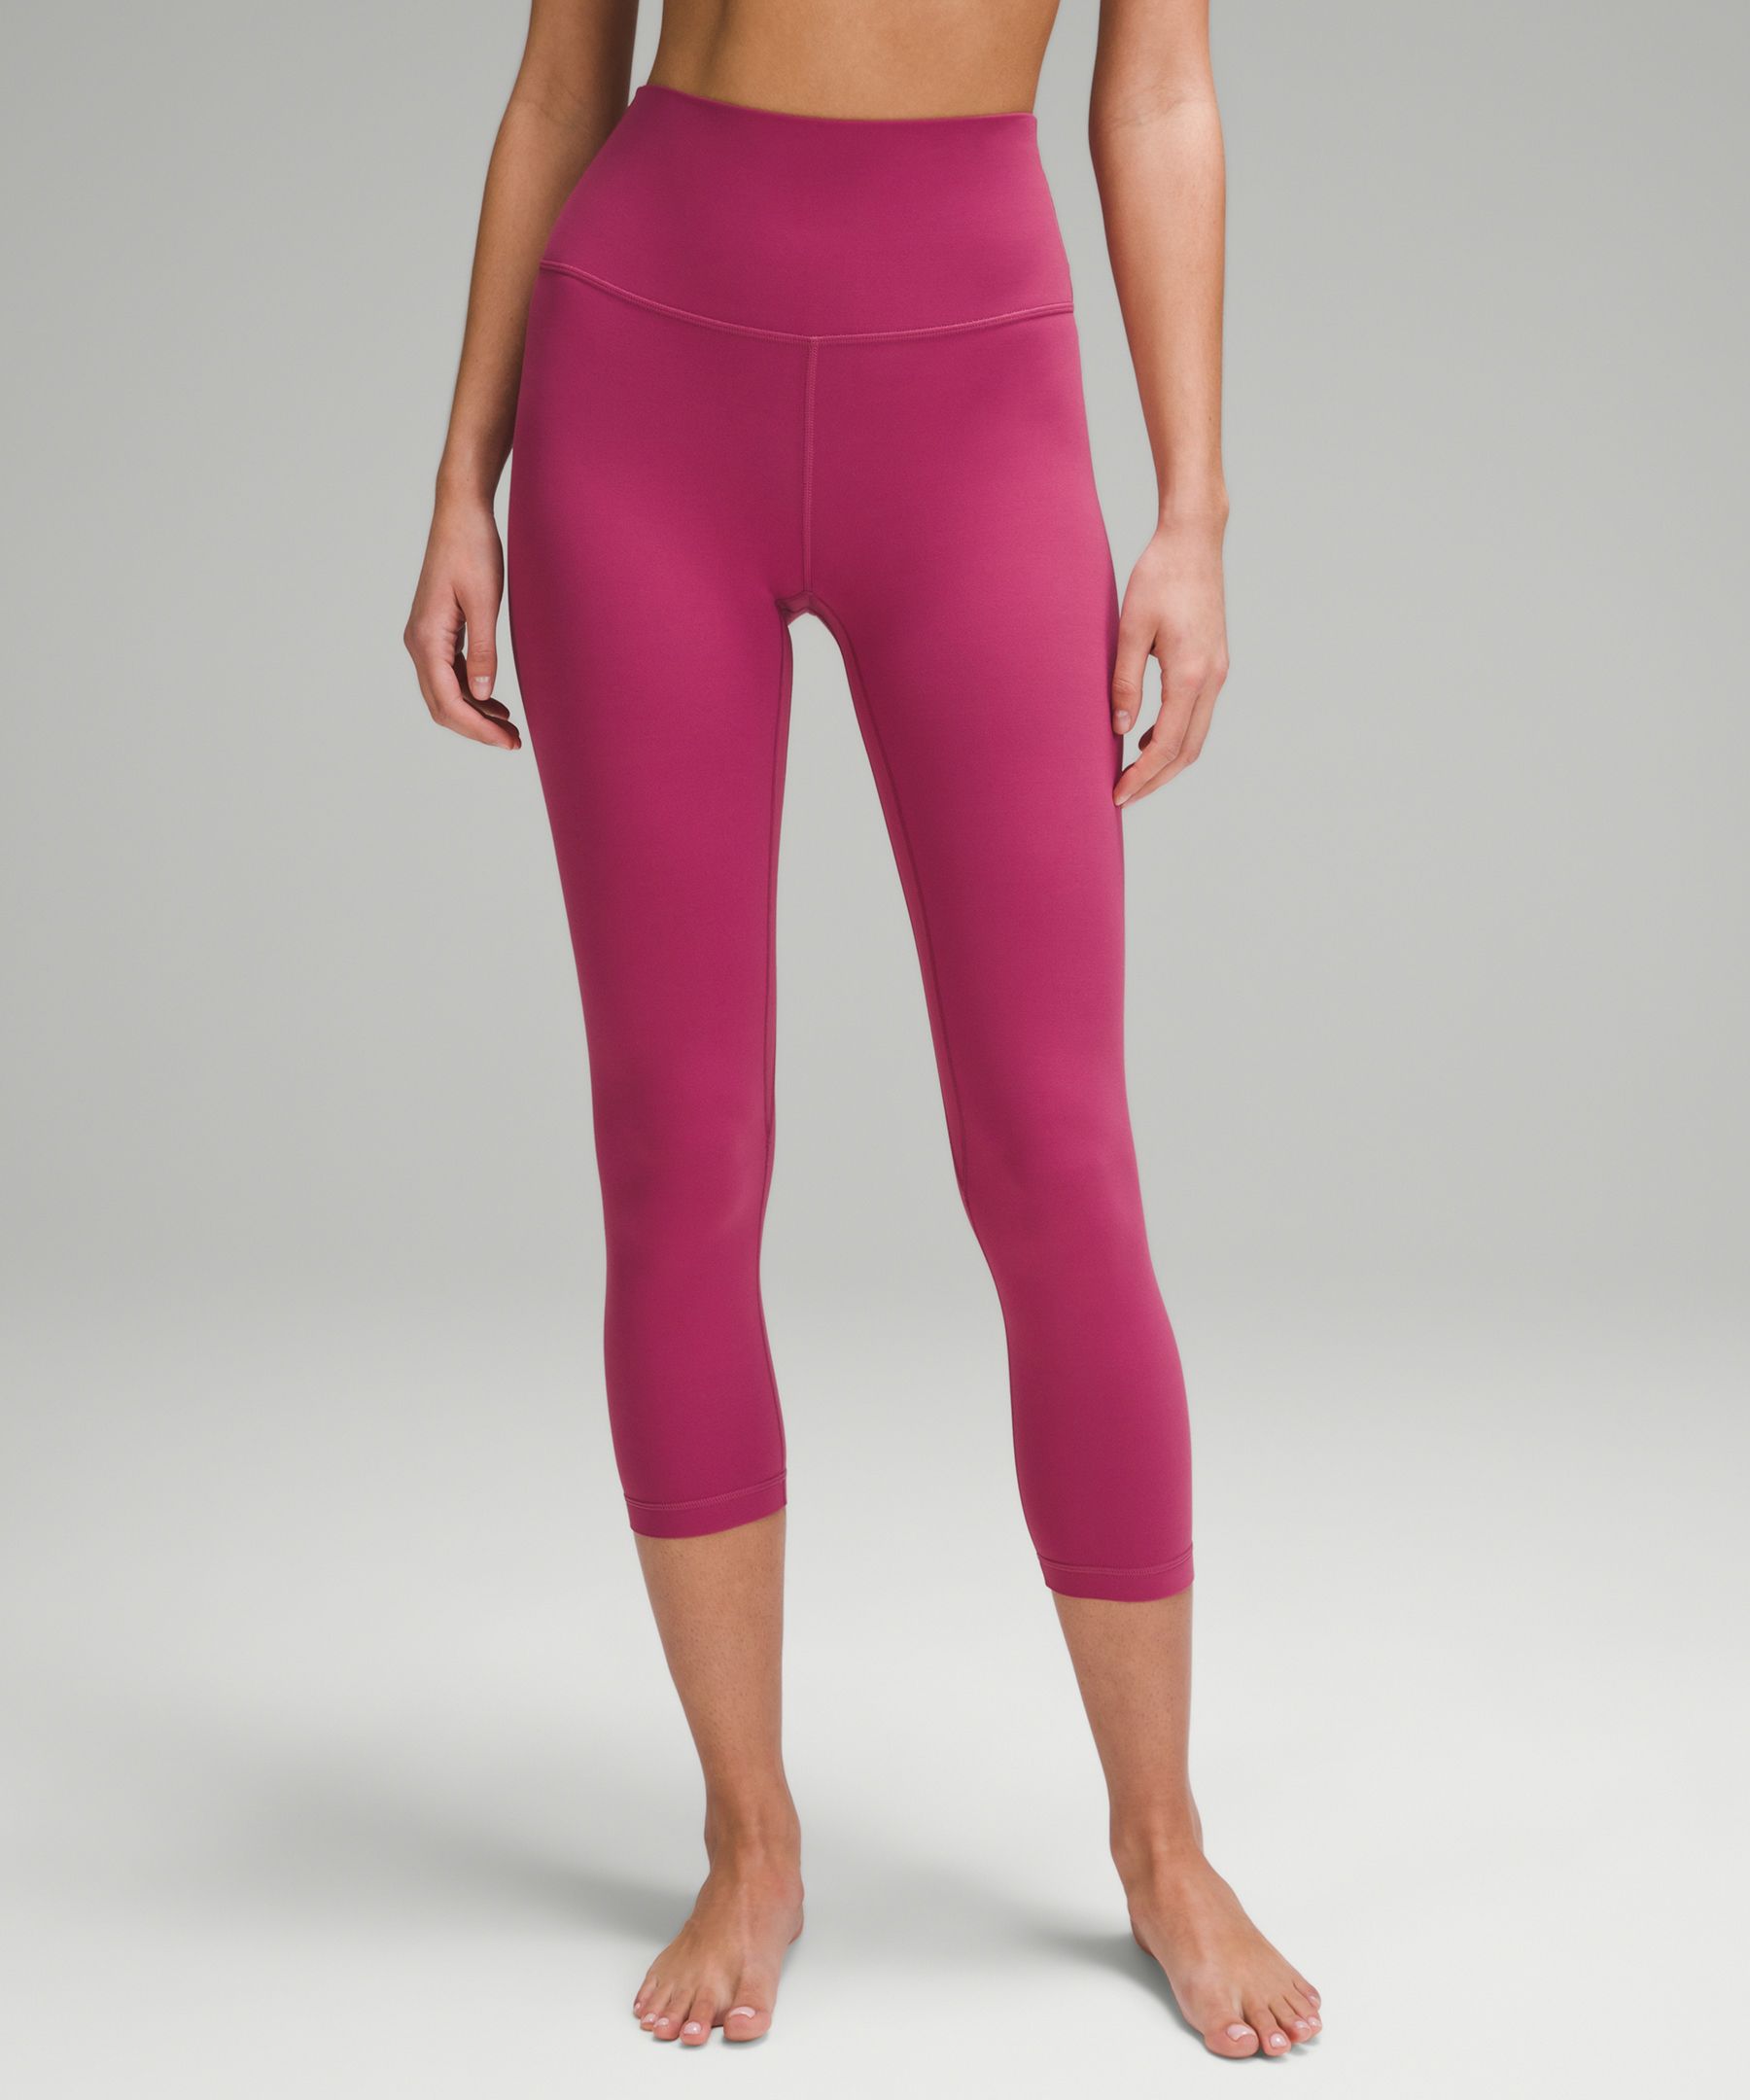 LEGGING REVIEW: lululemon aligns in sonic pink #fypage #fittok